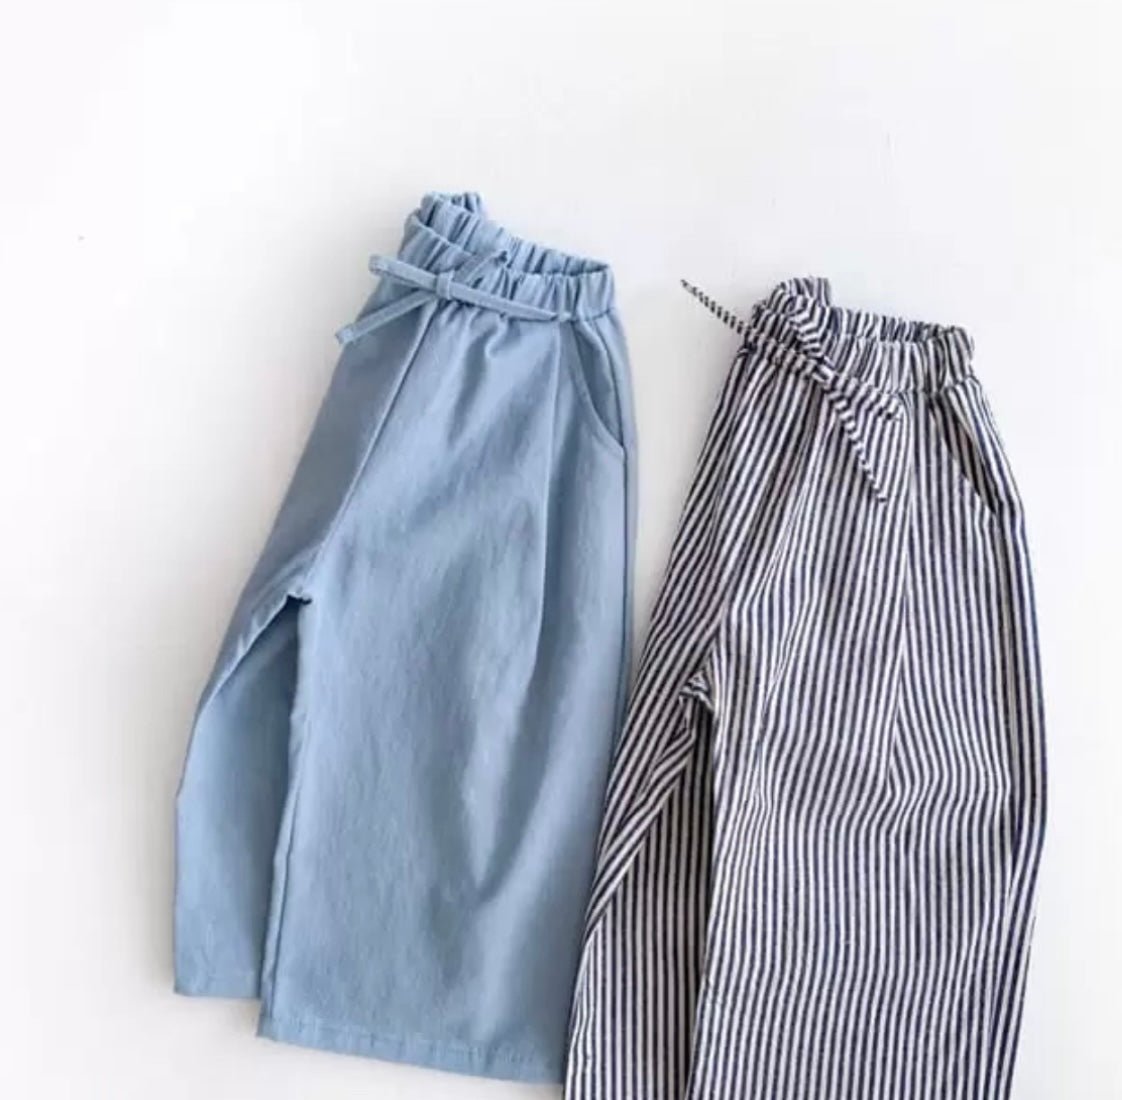 String Wide Pants find Stylish Fashion for Little People- at Little Foxx Concept Store